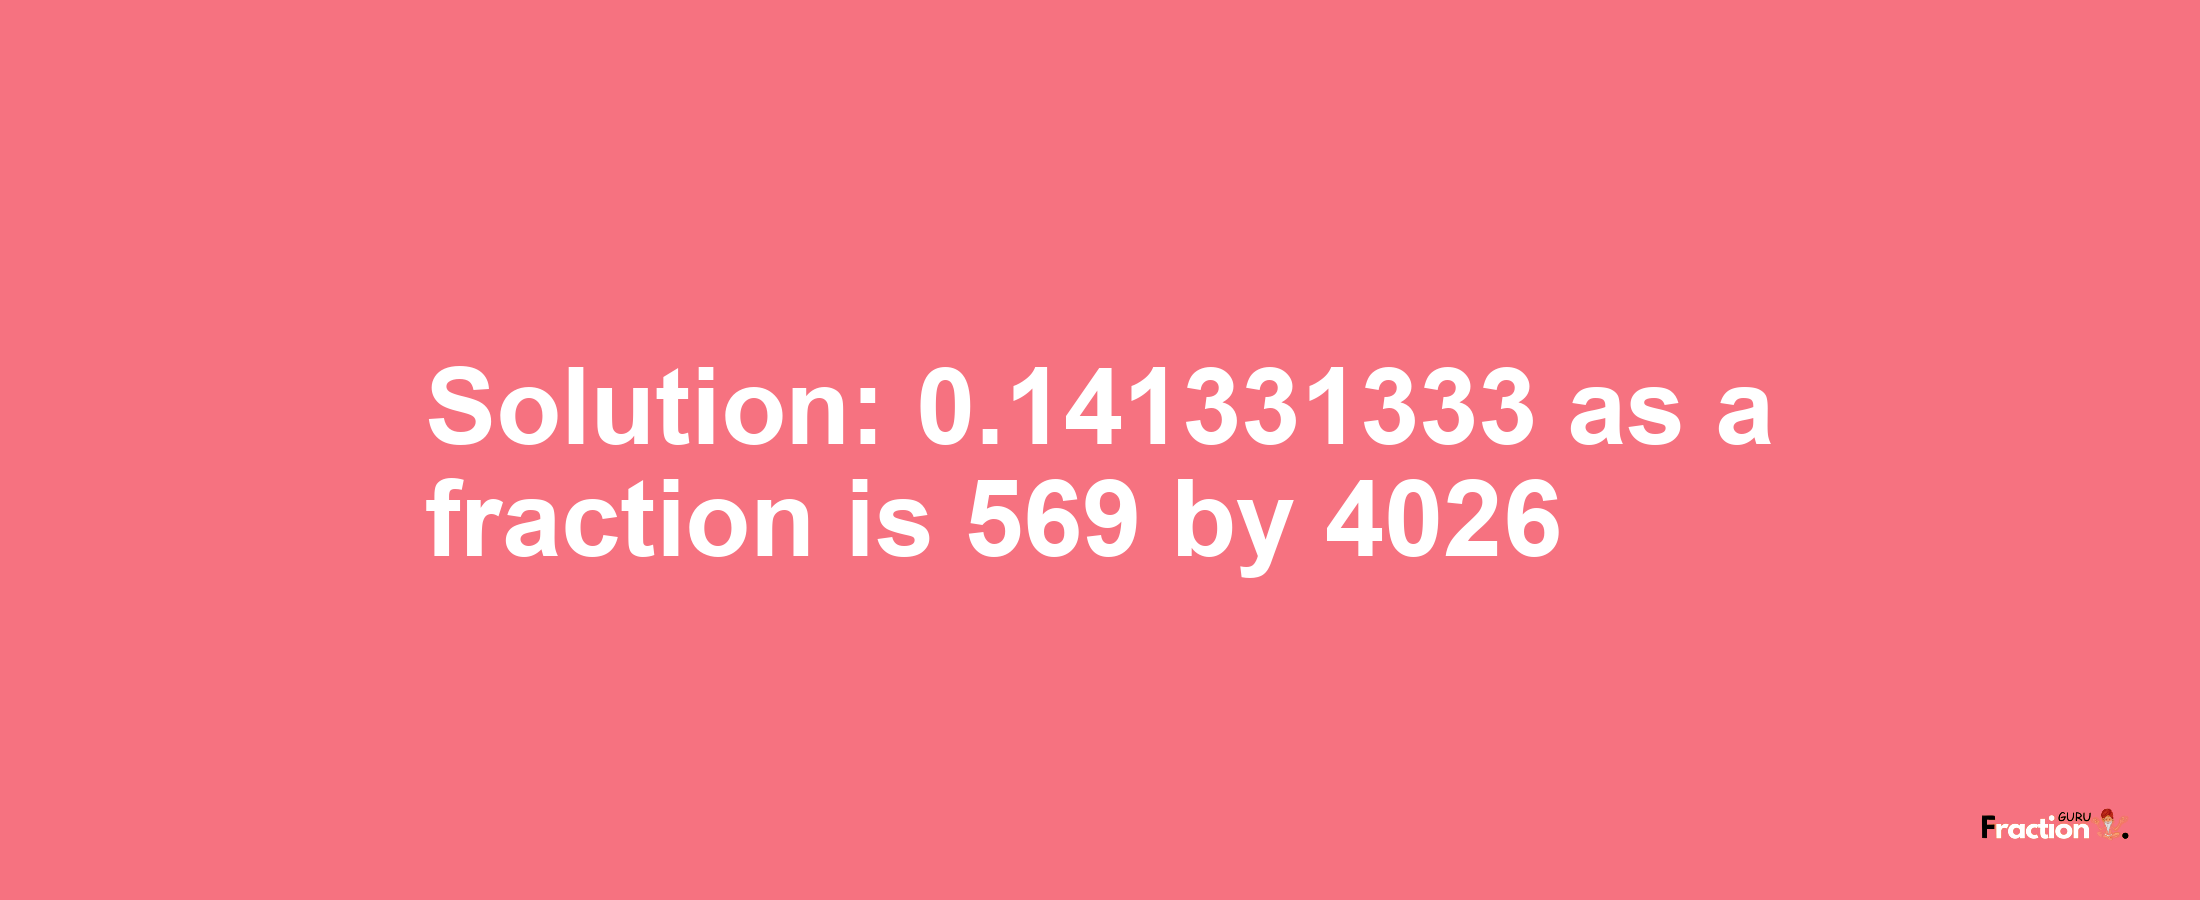 Solution:0.141331333 as a fraction is 569/4026